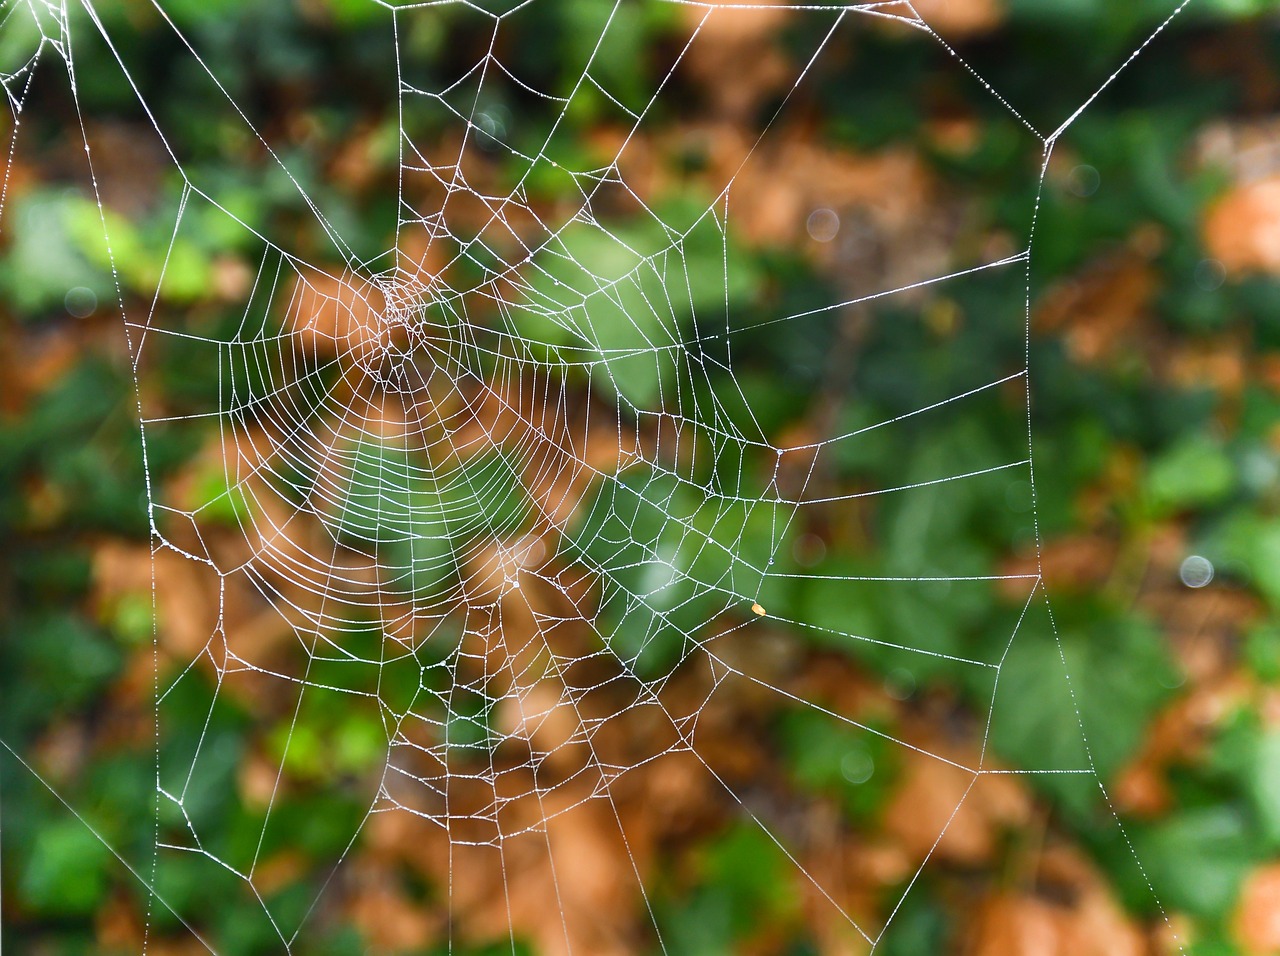 a spider web with water droplets on it, by Pamela Drew, shutterstock, autum, low angle 8k hd nature photo, soft shade, interlacing paths